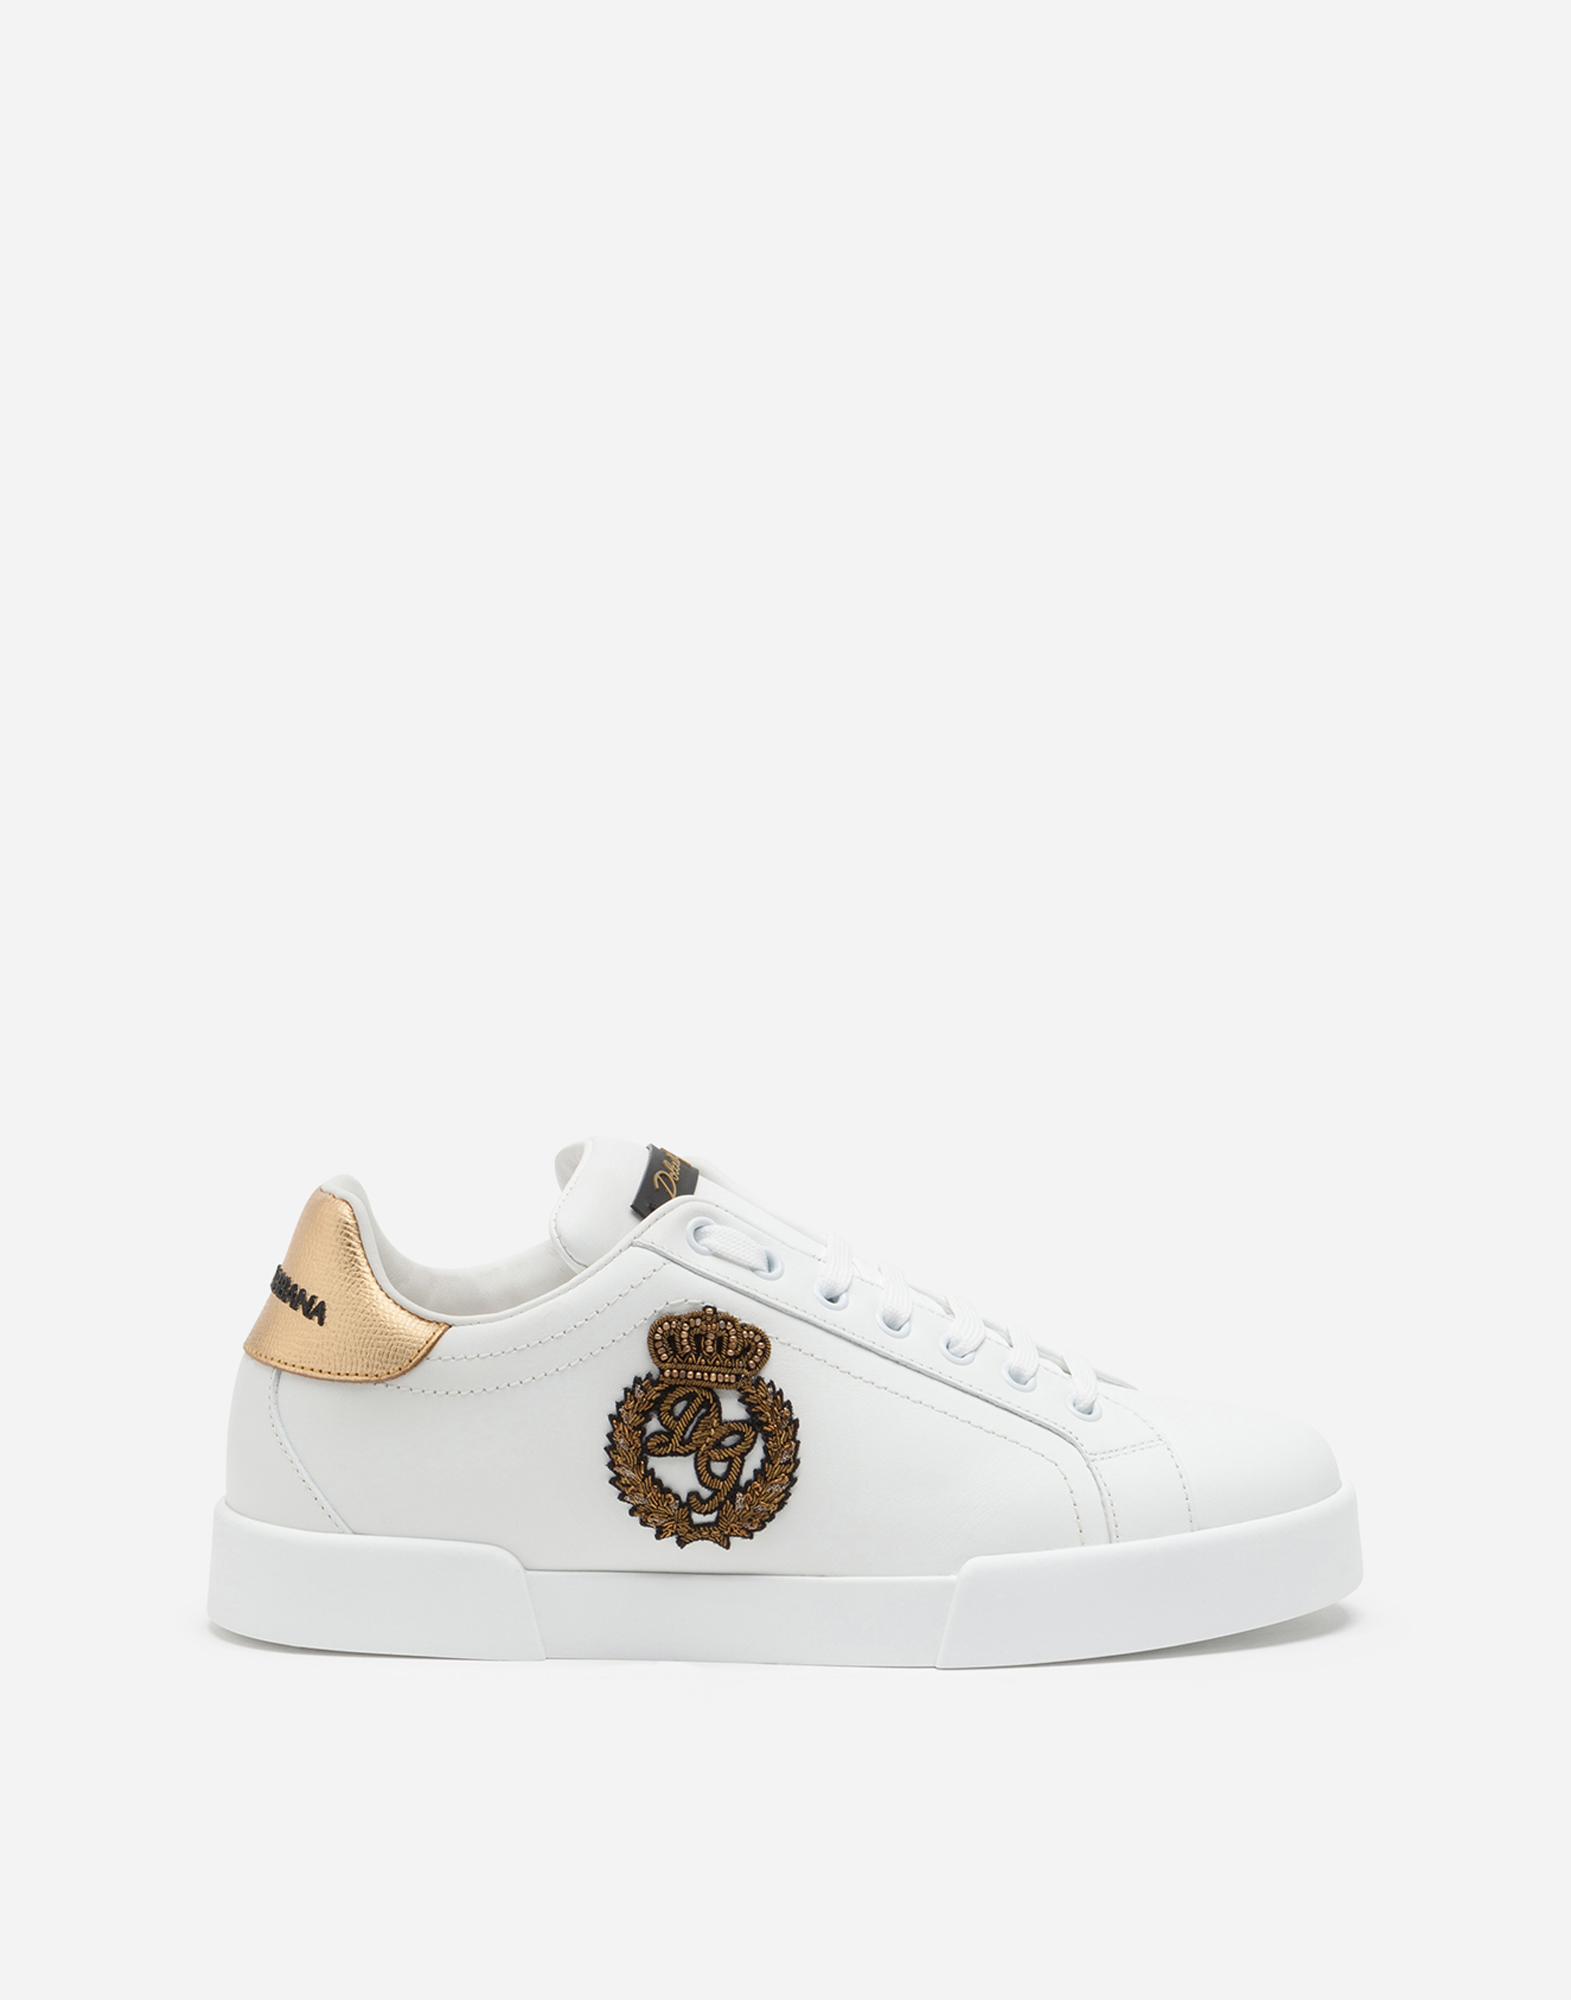 Calfskin nappa Portofino sneakers with crown patch in White/Gold